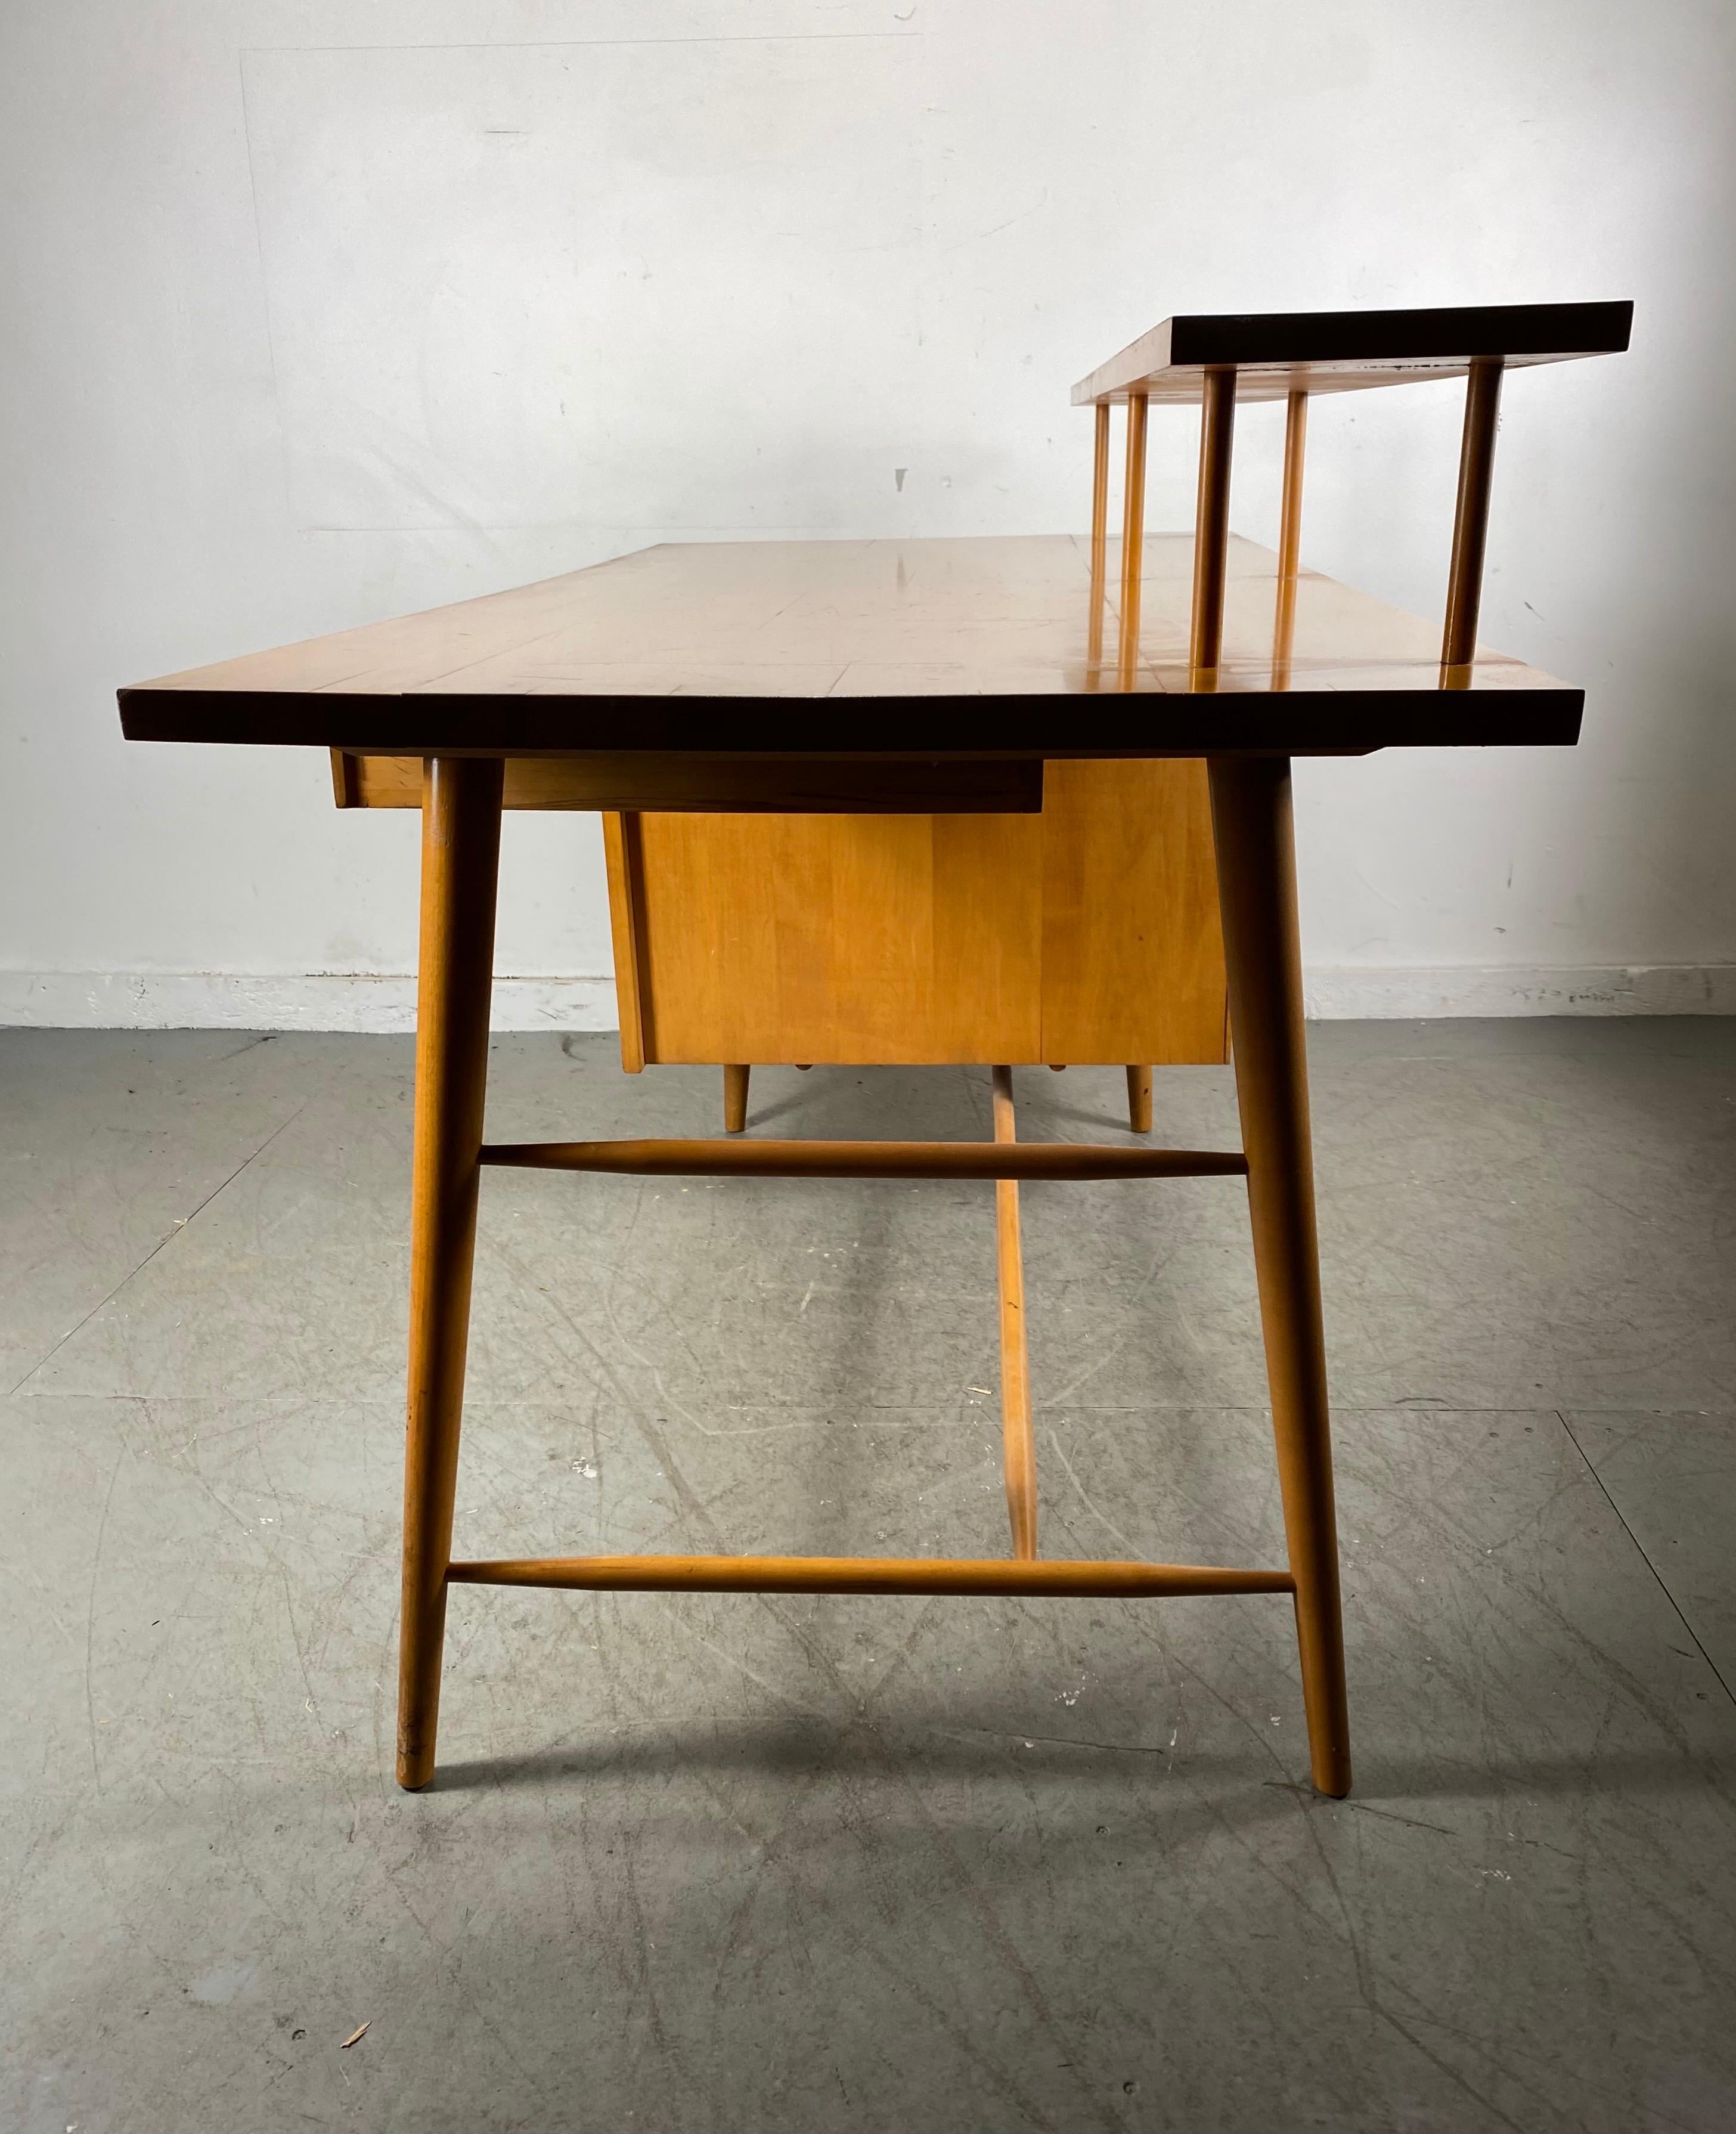 Seldom seen Paul McCobb for Winchendom Furniture Company, desk, maple, United States, 1950s

Elegant maple desk with one sided pedestal with a large storage compartment and three small drawers on the other side. The desk is executed with slender